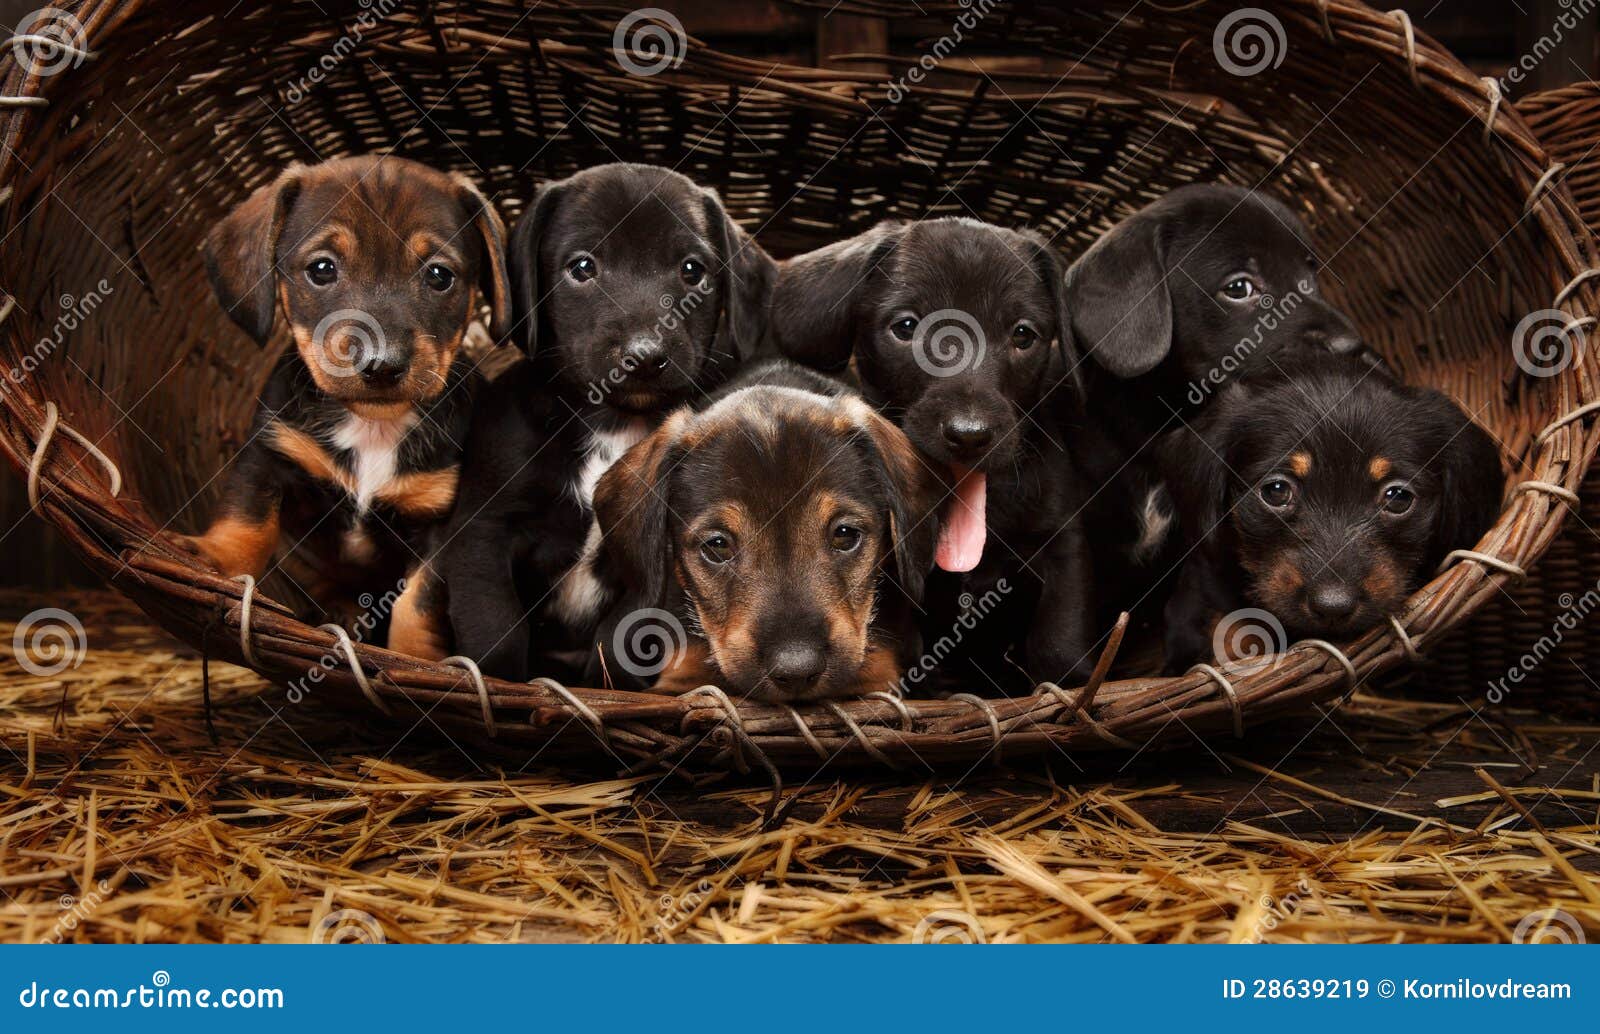 Dachshund Puppies 3 Weeks Old Royalty Free Stock Images ...